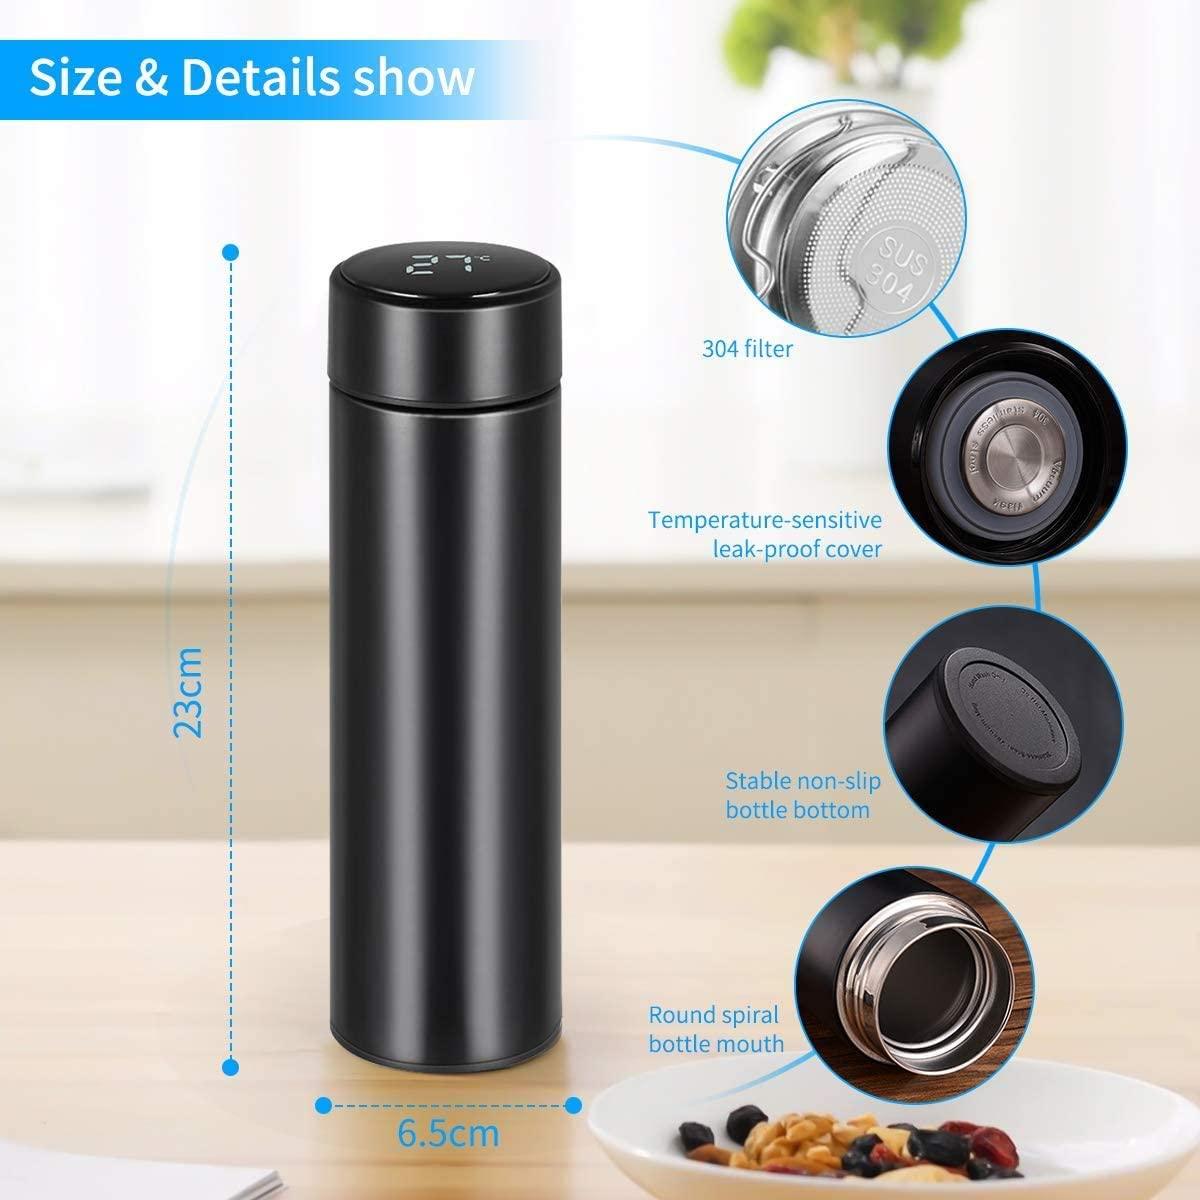 "Thermo-Smart" HydroFlask - Obsidian Black Naash